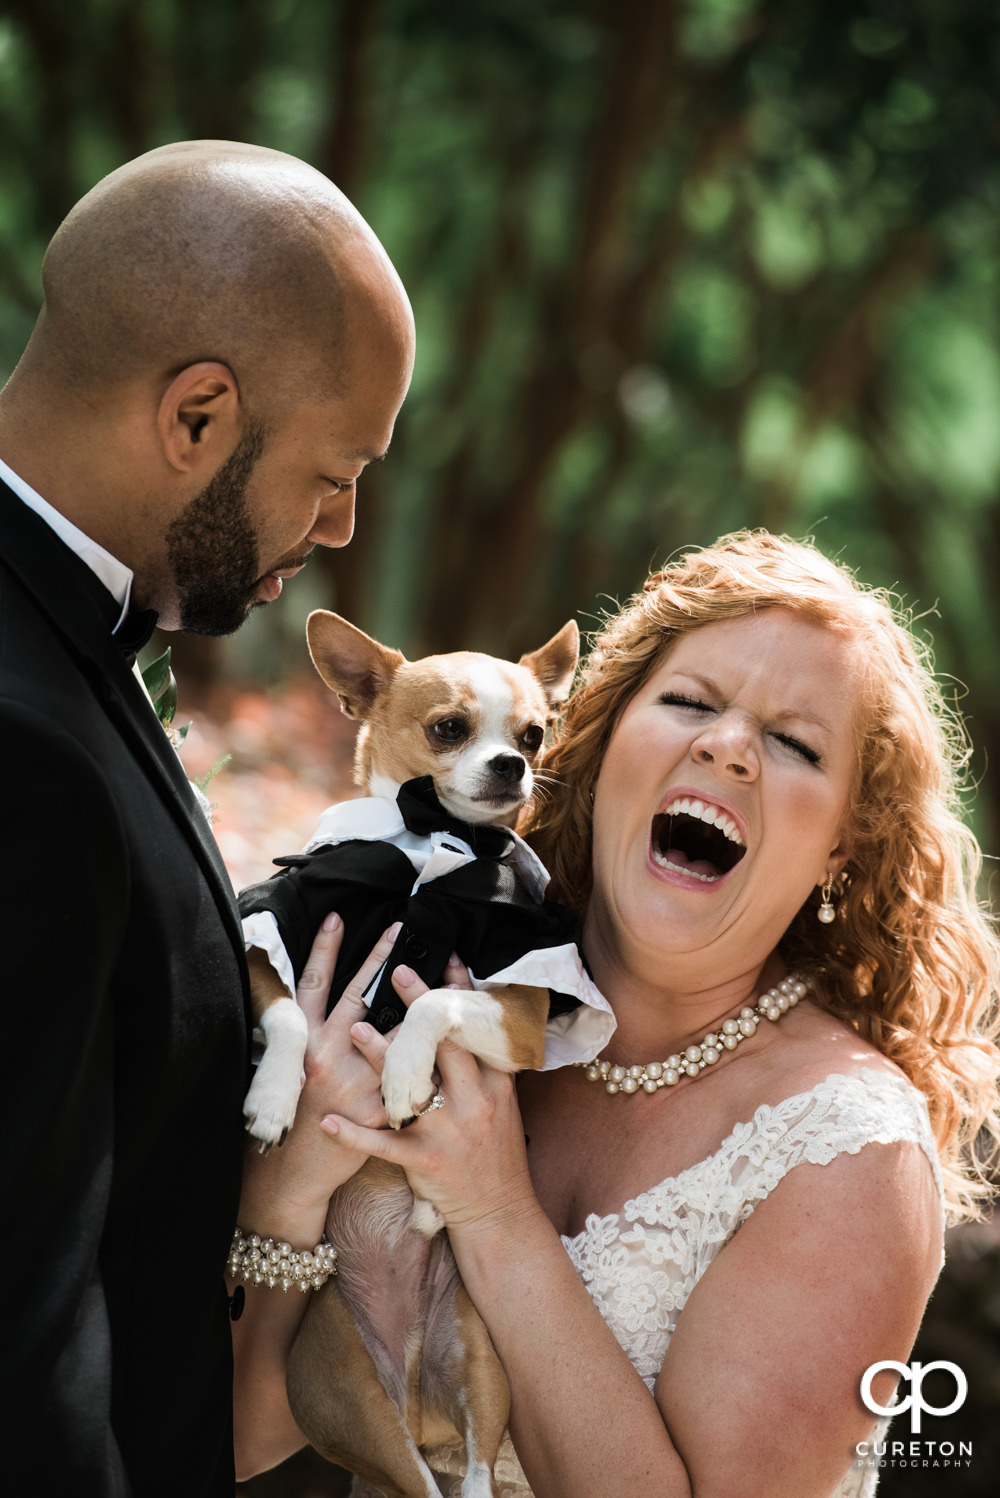 Bride and Groom with their dog before the wedding.